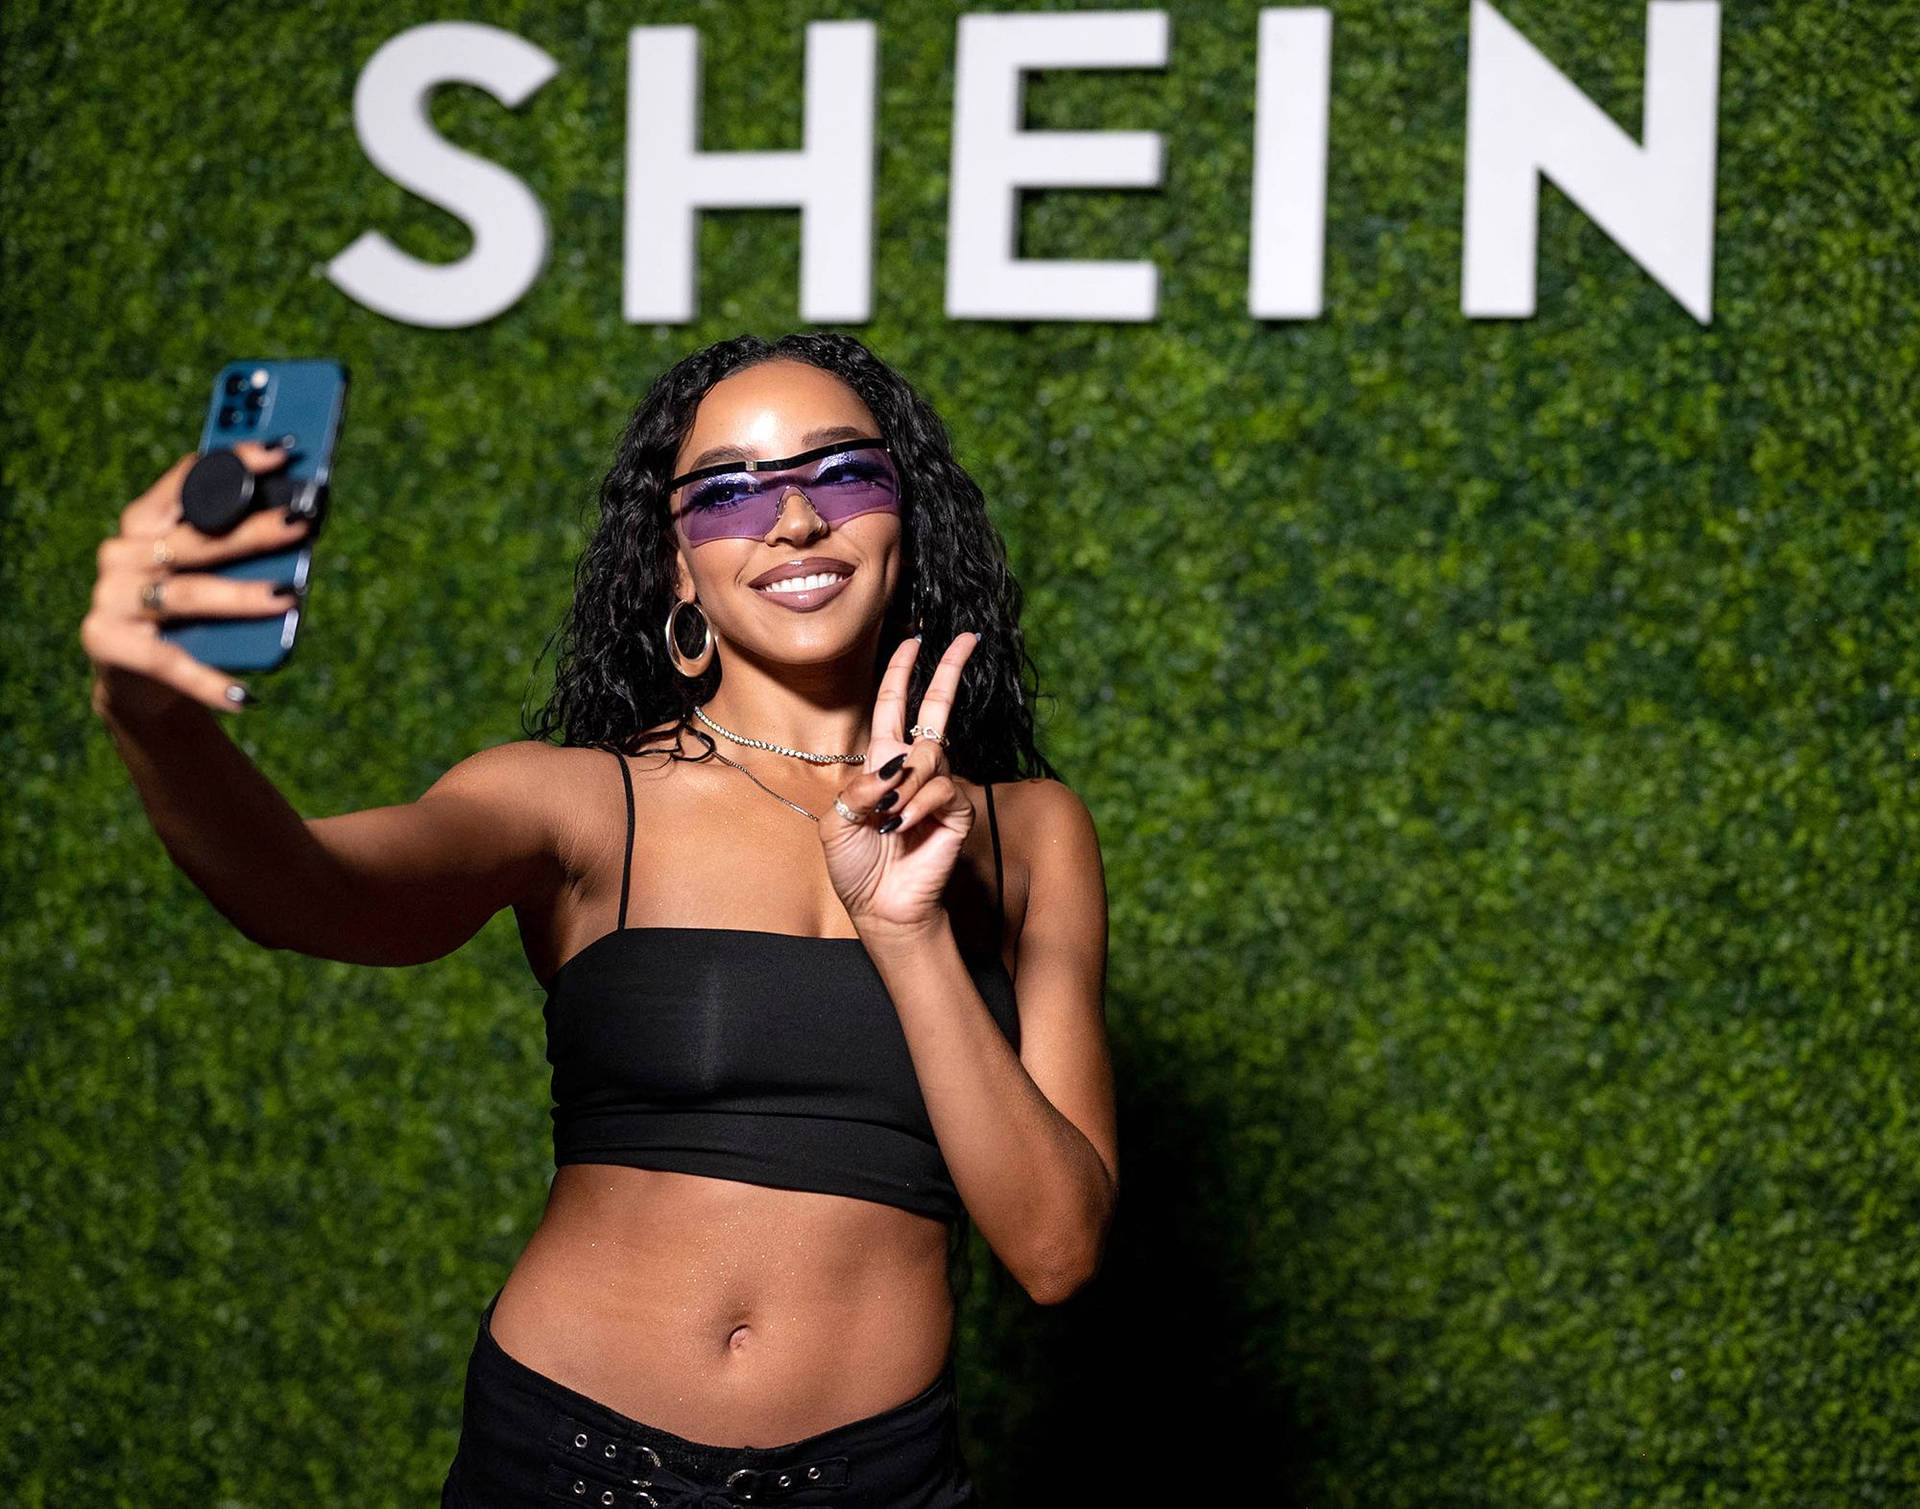 Selfie With Shein Sign Wallpaper